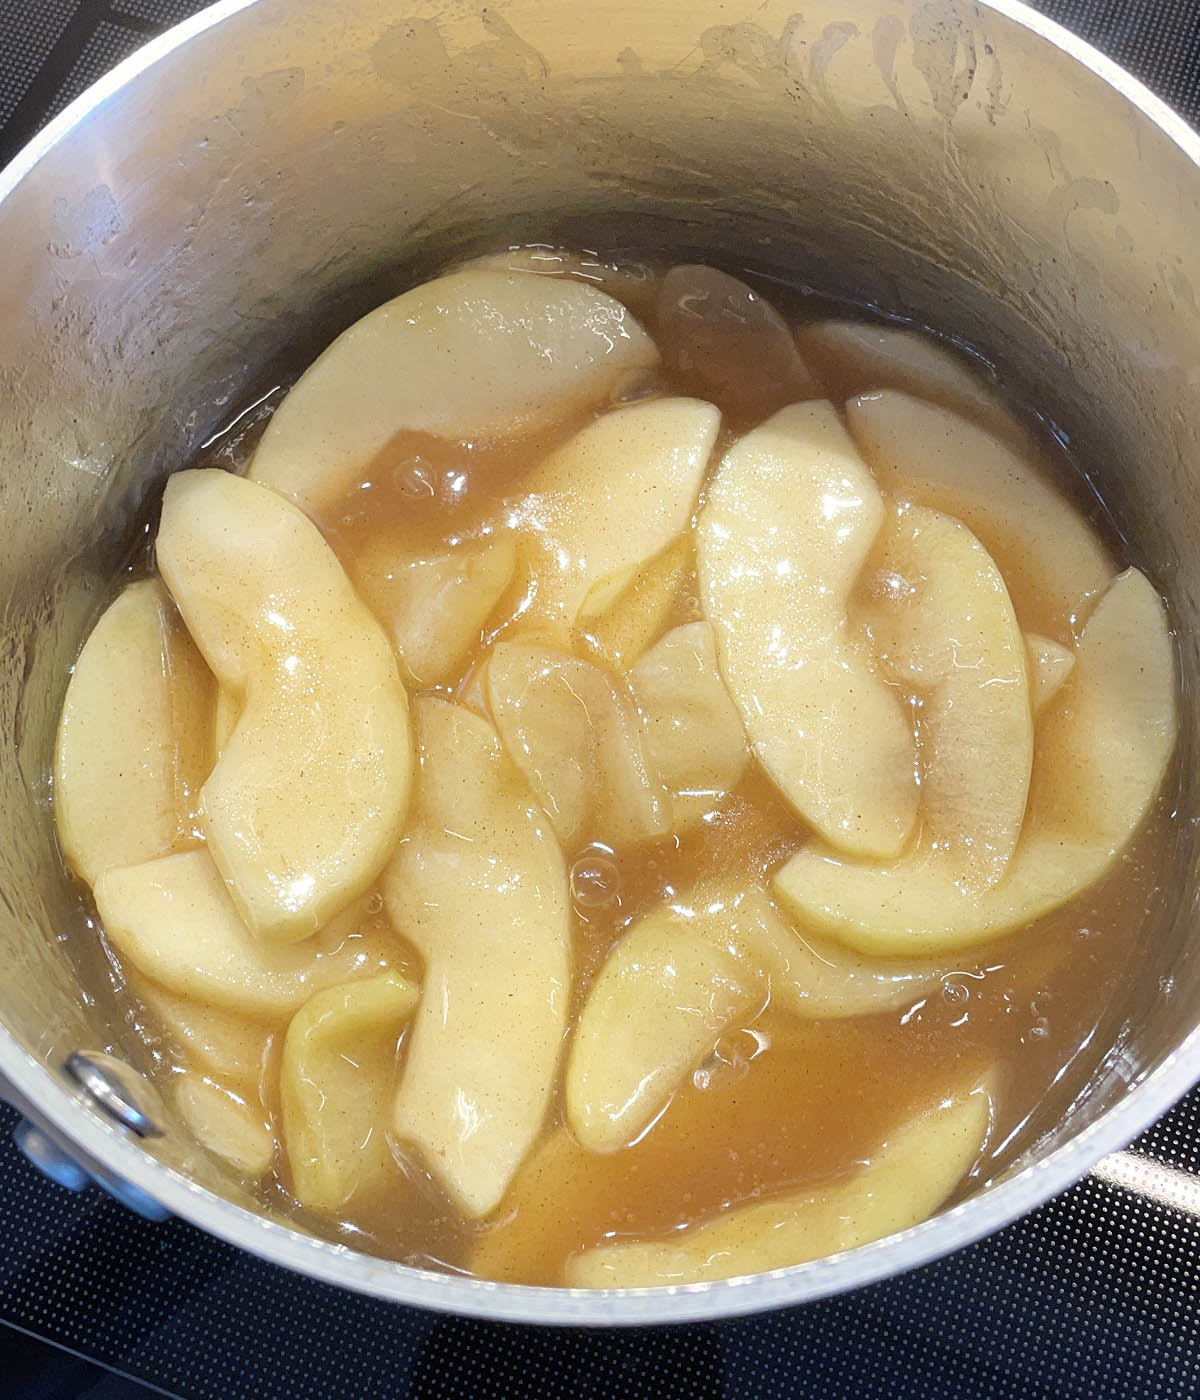 Apple slices in a brown sauce in a metal pot.